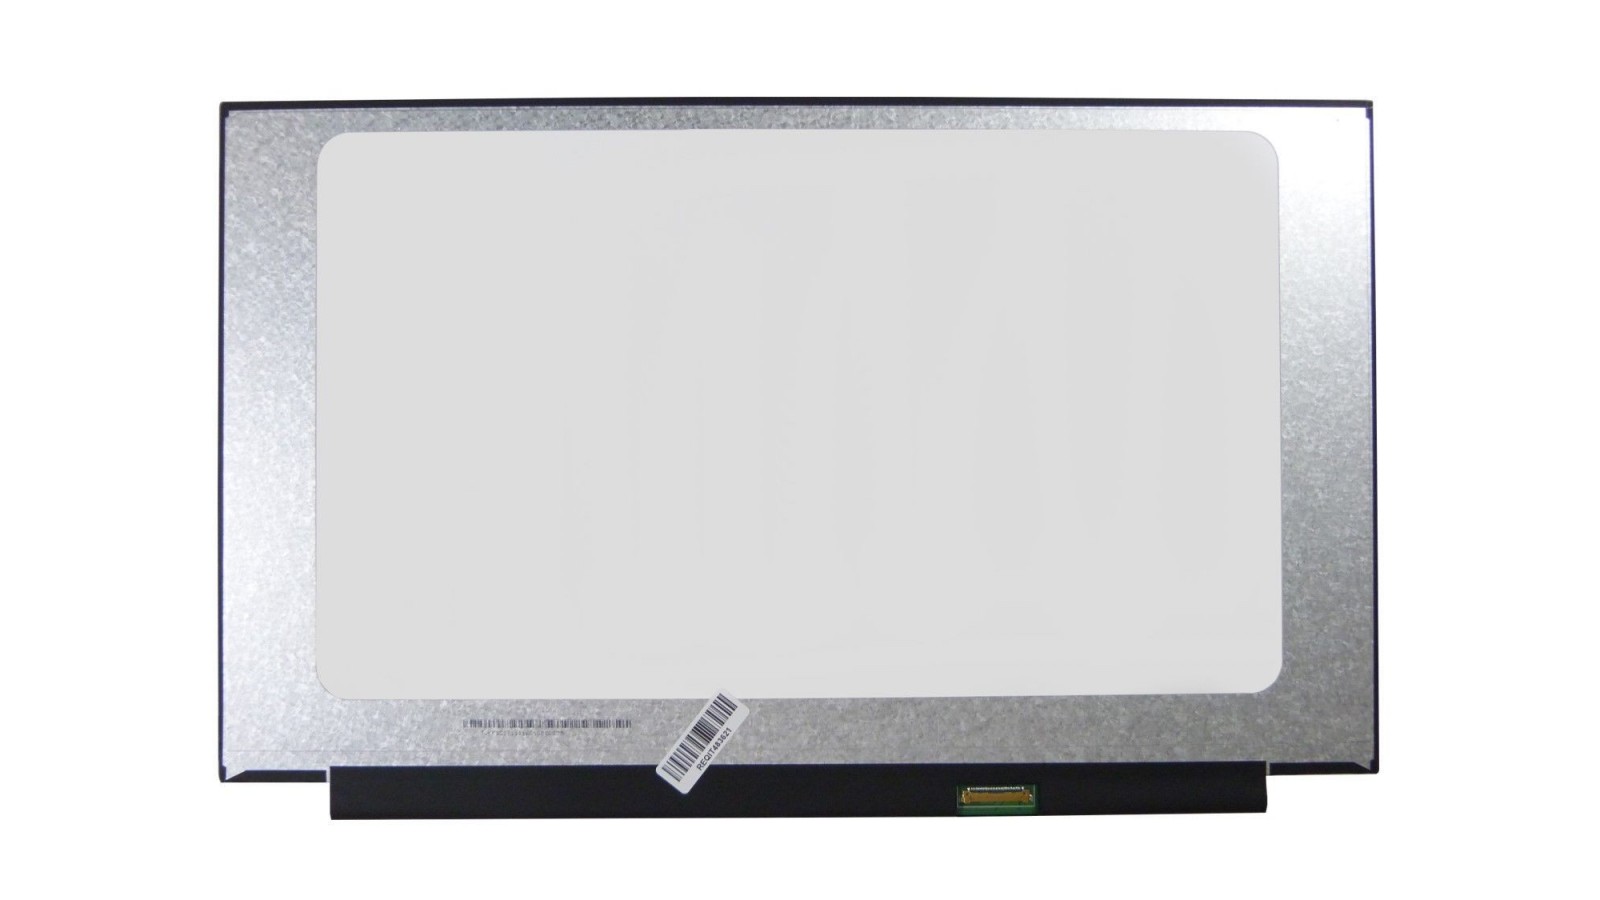 Display LCD Schermo 15,6 Led NT156FHM-N62 V8.0 V8.1 Full Hd connettore 30 pin